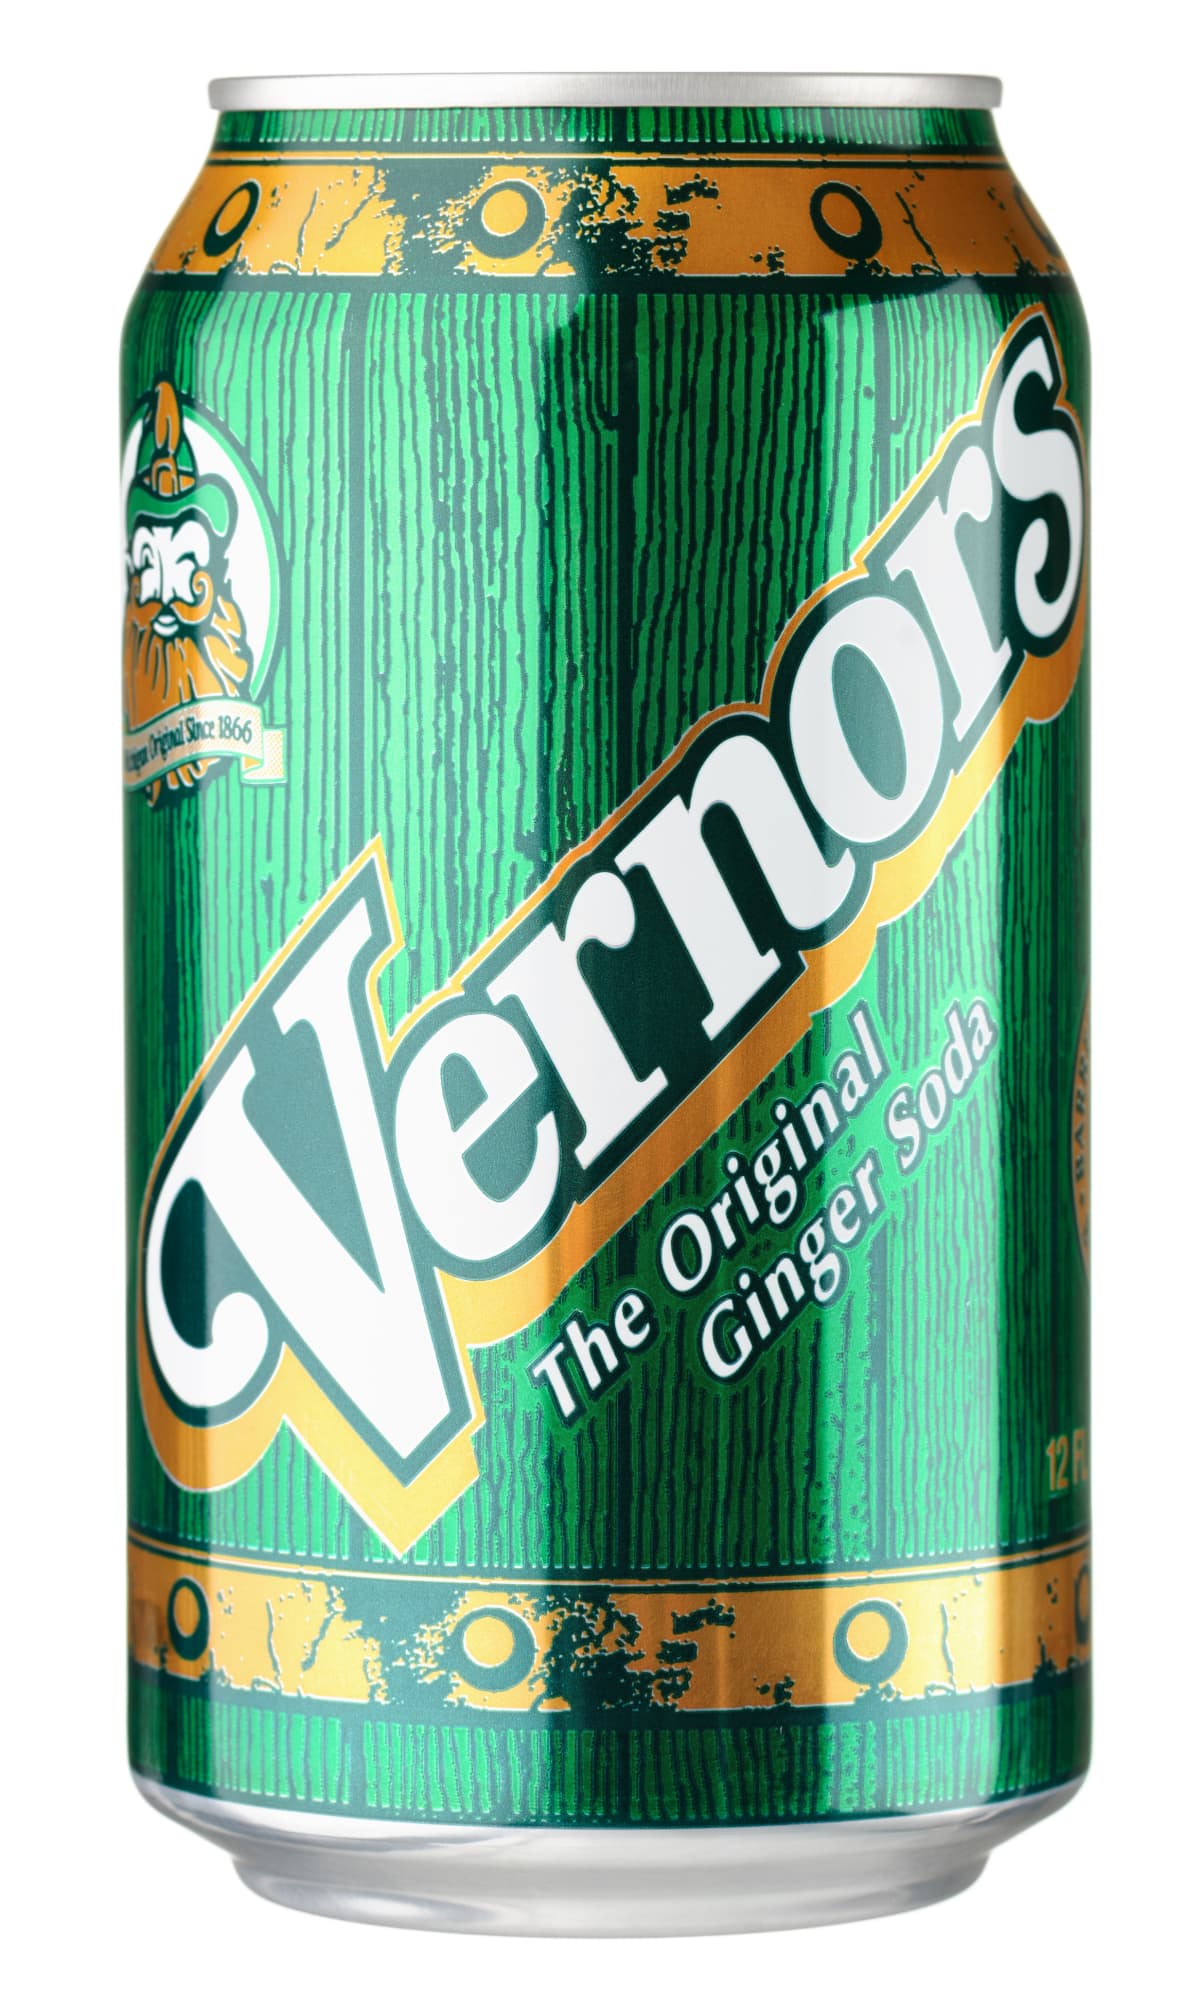 "Colorado Springs, Colorado, USA - April 11, 2012: A can of Vernors shot in the studio and isolated on a white background. Created by Detroit, Michigan pharmacist  James Vernor in 1866, Vernors is America's oldest surviving soft drink."